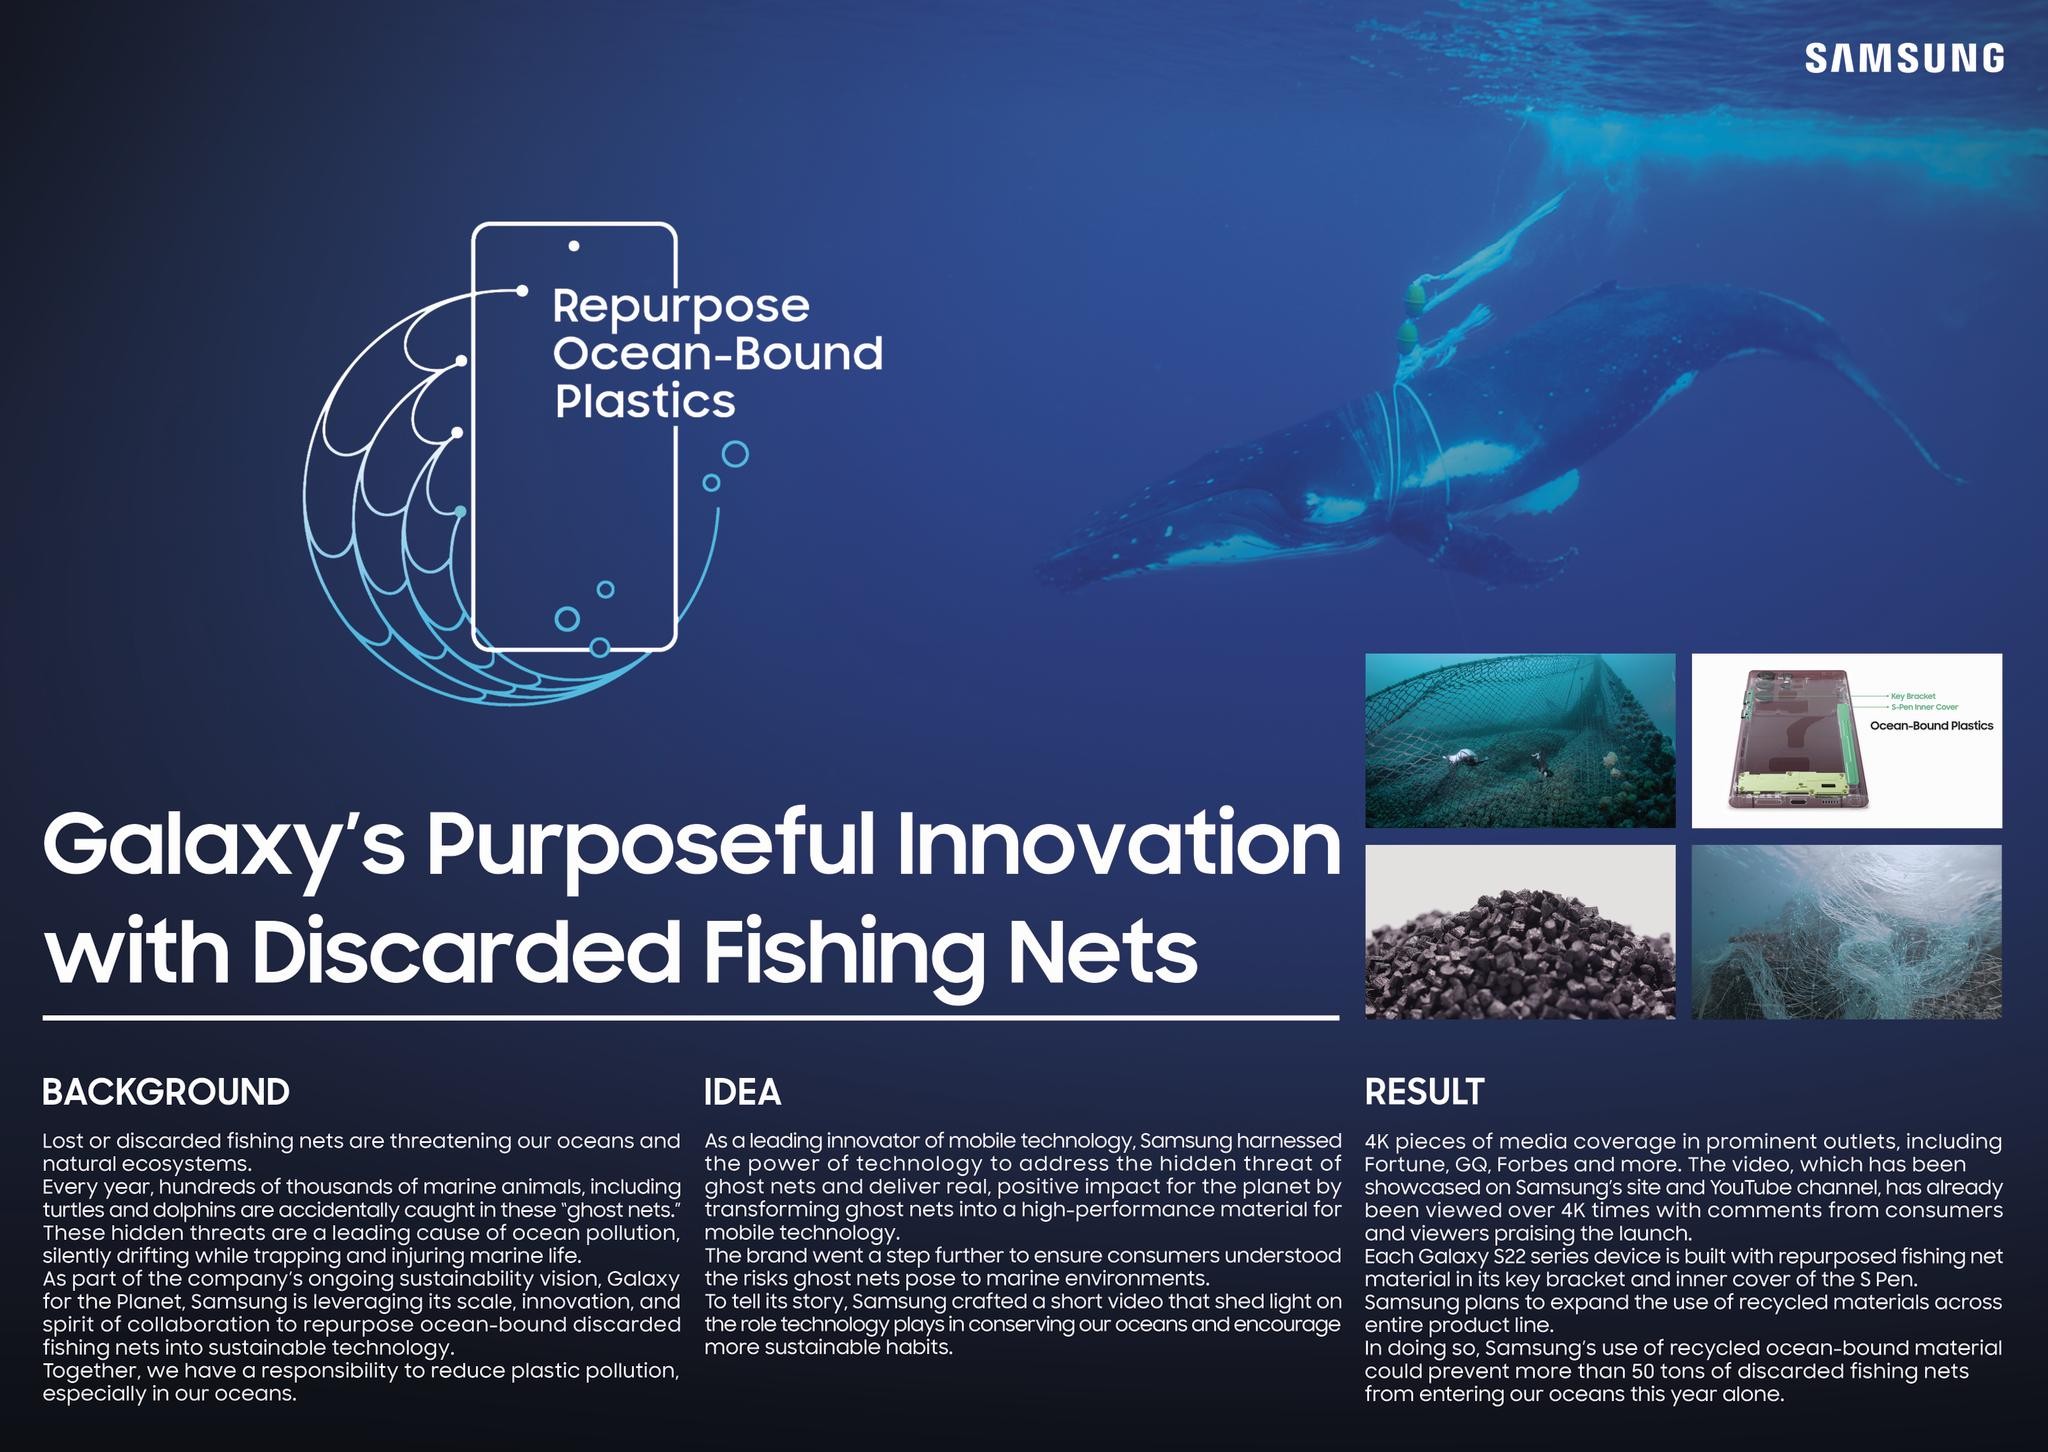 Galaxy’s Purposeful Innovation with Discarded Fishing Nets